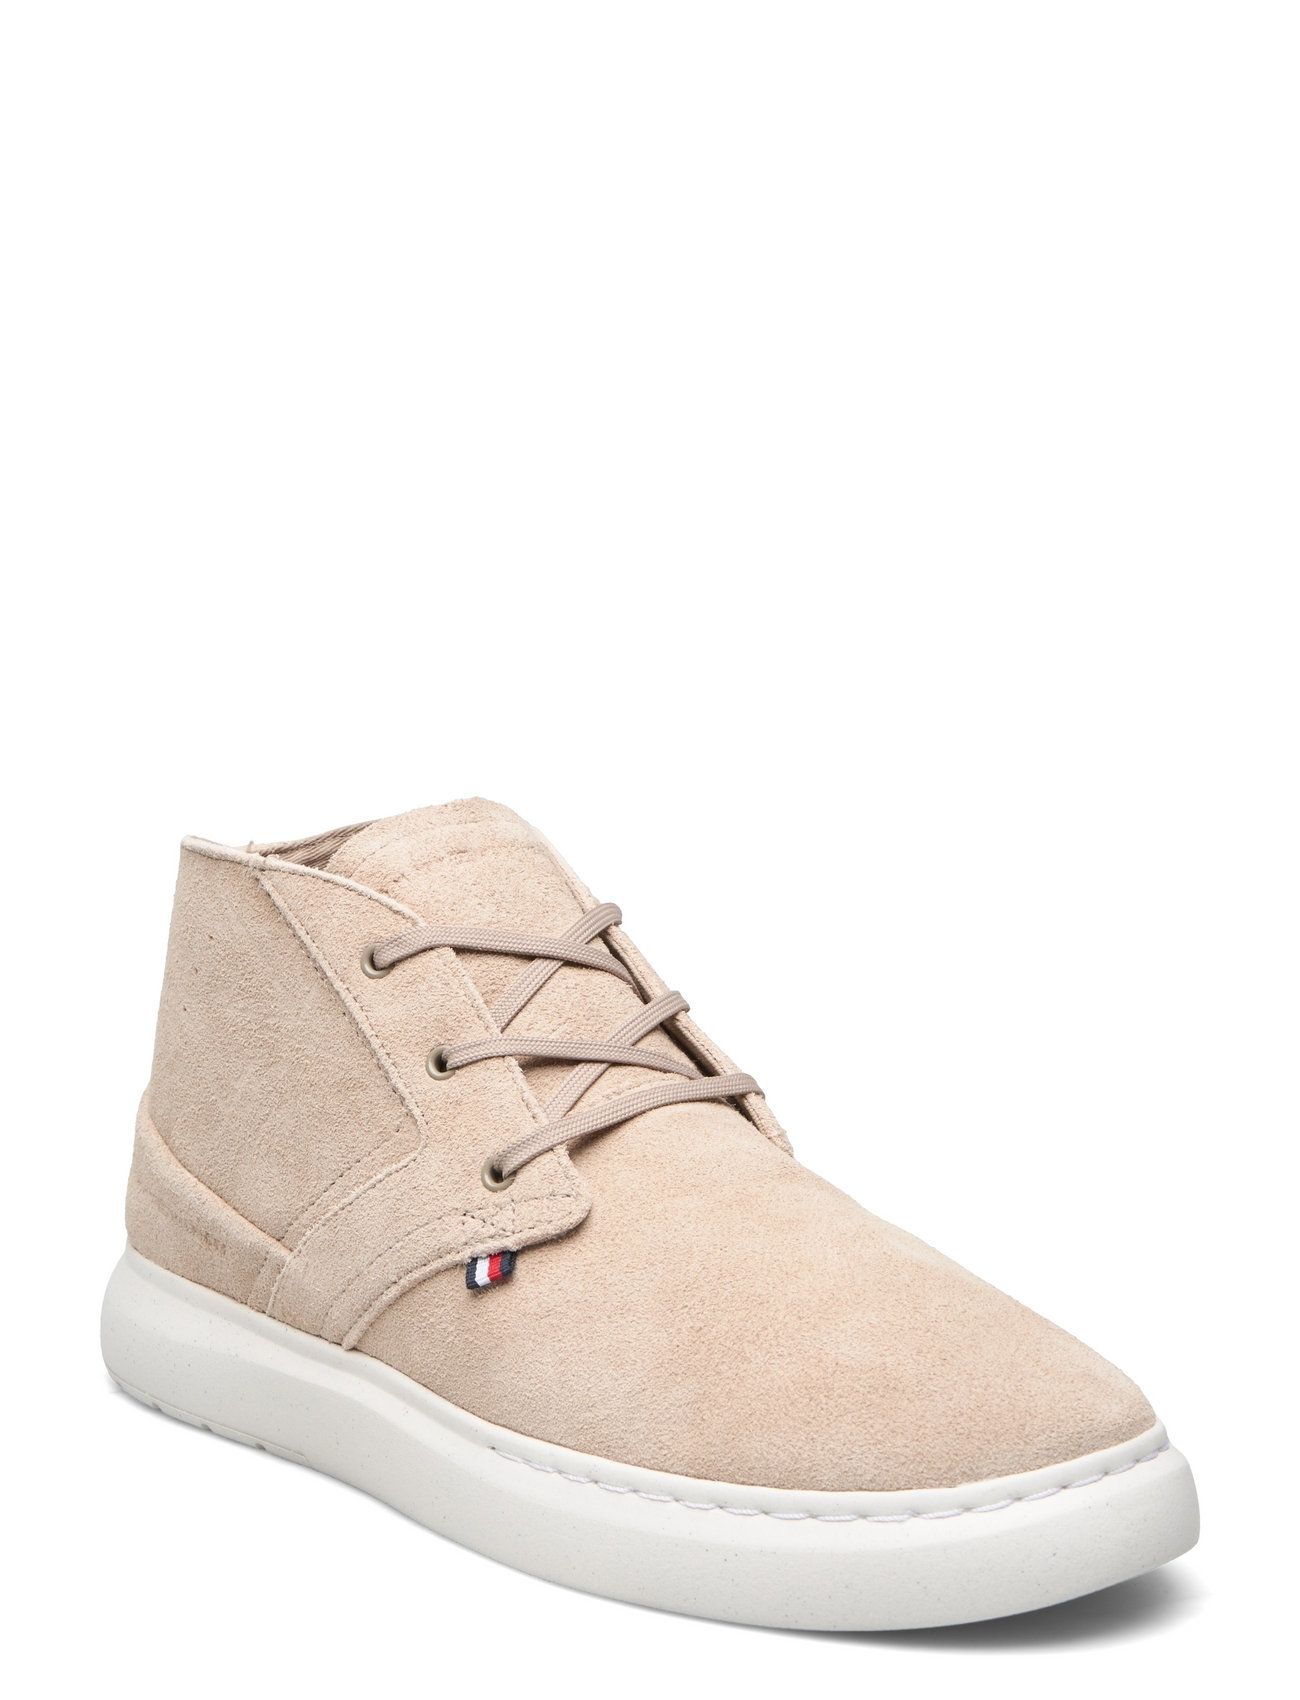 Tommy Hilfiger Hybrid Boot Shoes Sneakers Business Sneakers Beige Tommy Hilfiger